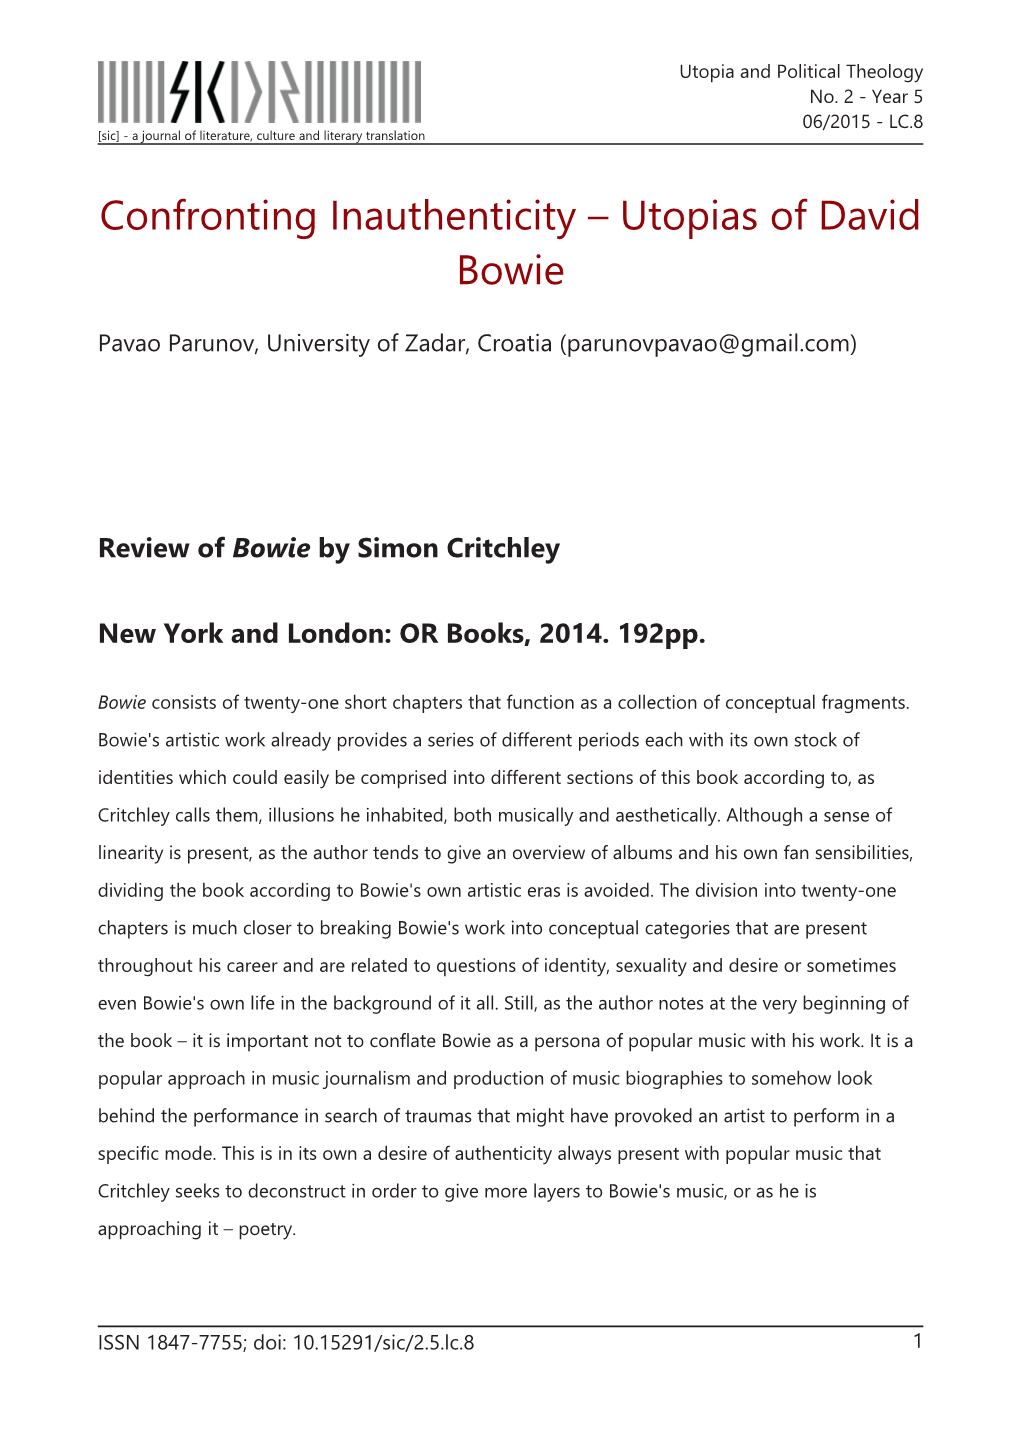 Confronting Inauthenticity – Utopias of David Bowie